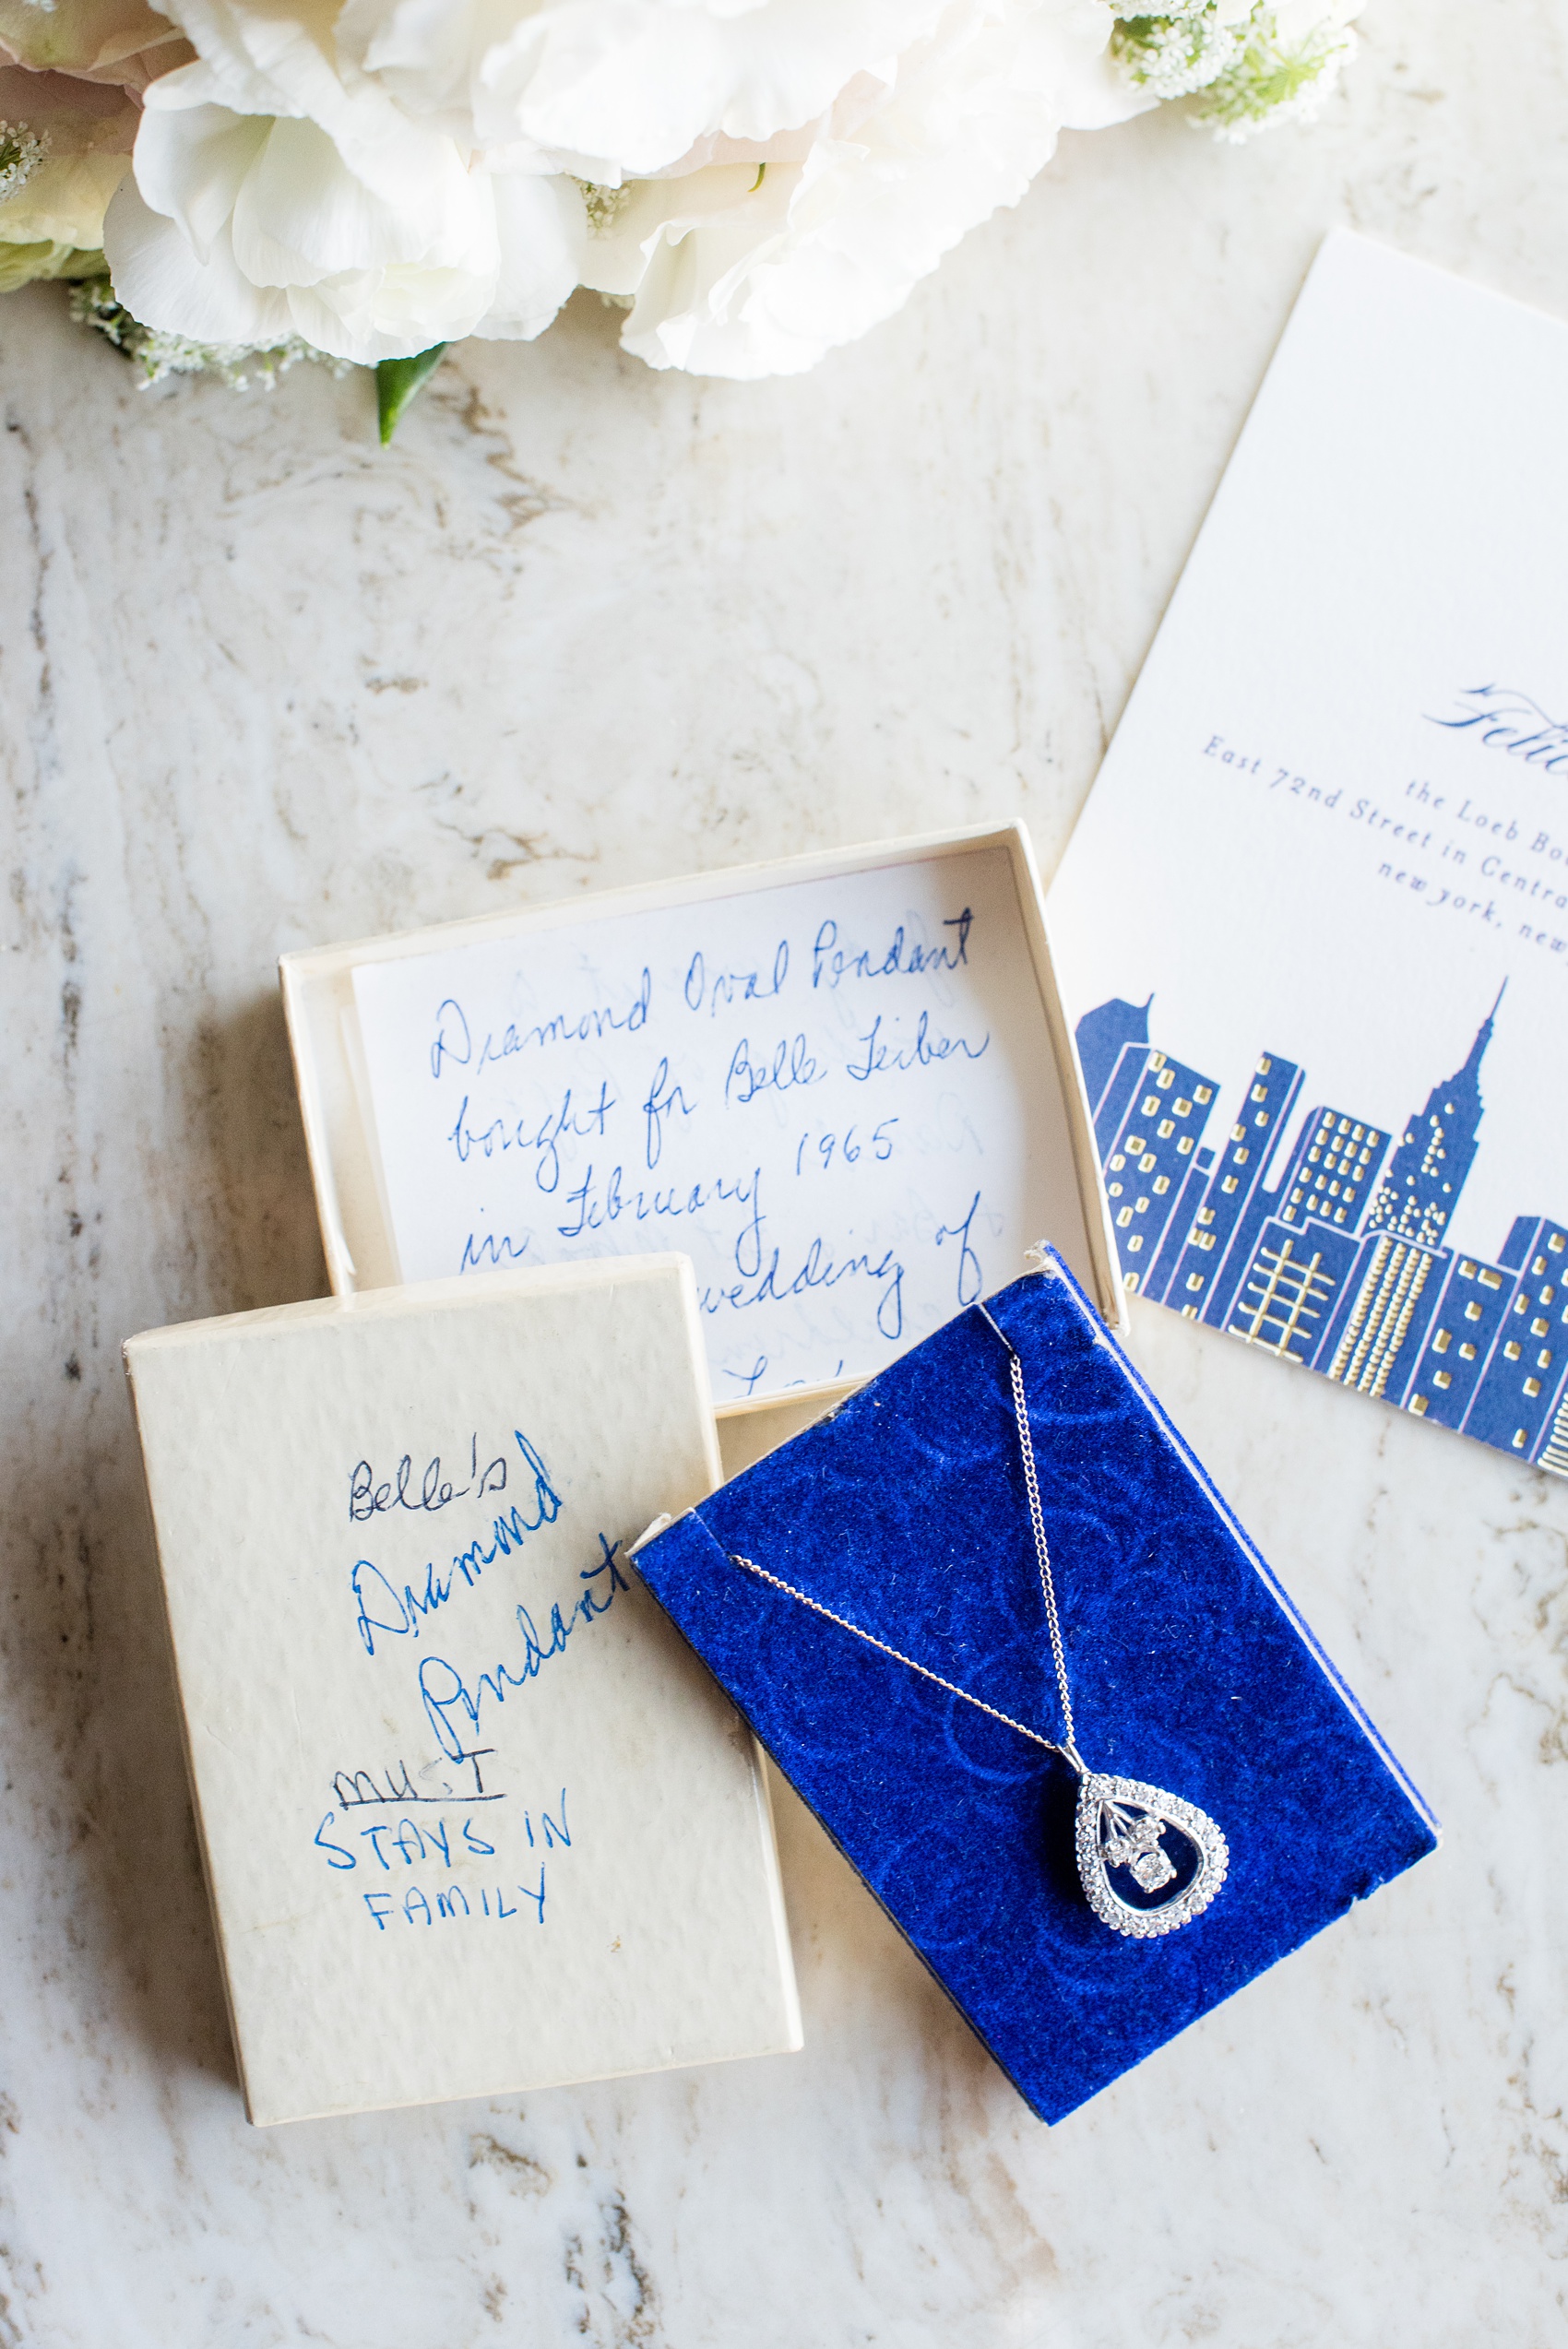 Photos by Mikkel Paige Photography of a Central Park Wedding ceremony and reception at the Loeb Boathouse venue with a romantic theme. This detail picture of the bride's necklace shows the heirloom jewelry passed from generations. Click through for more images from her day! #CentralParkWedding